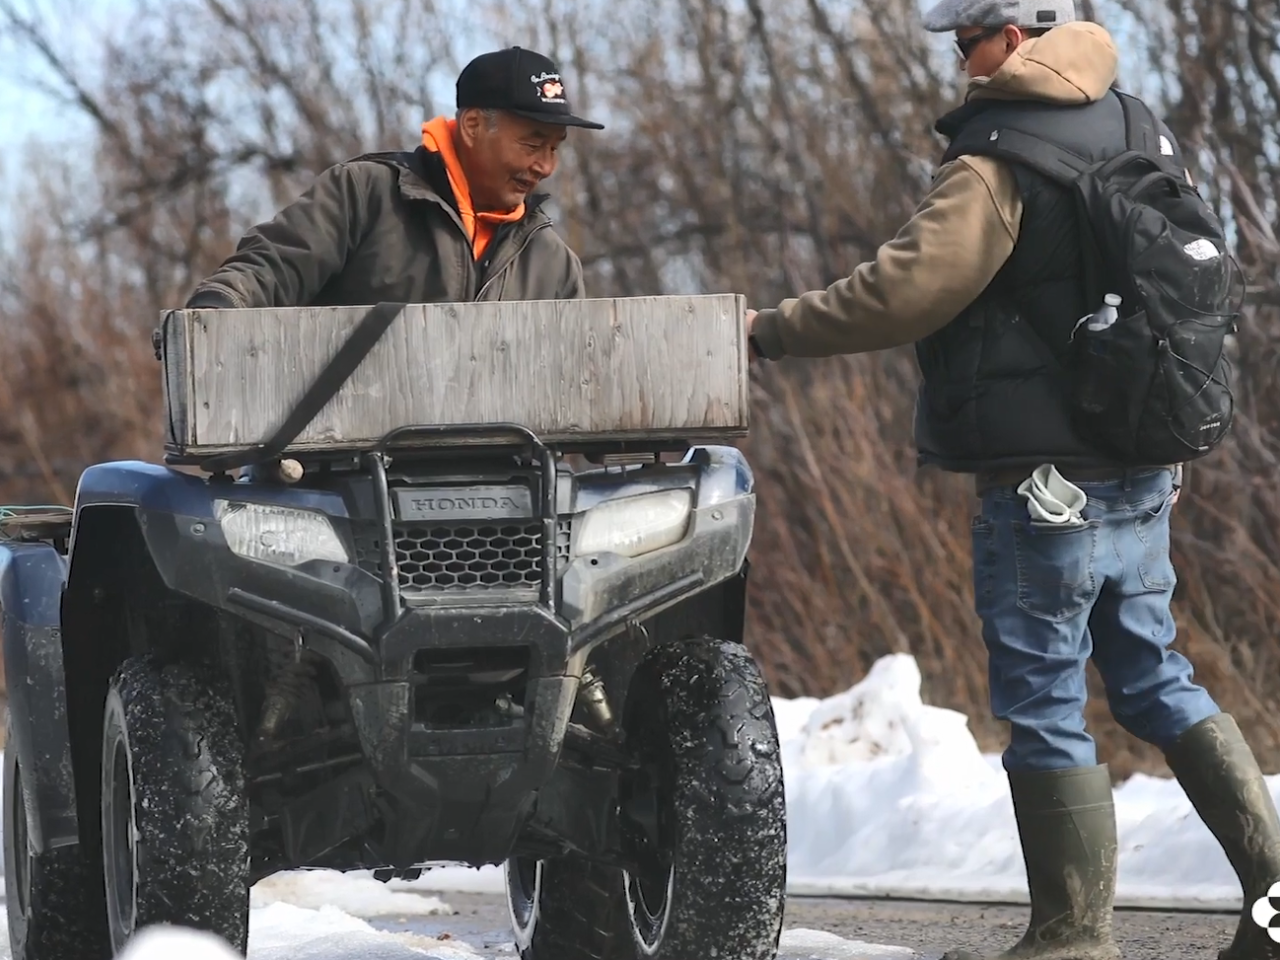 A person hand a package to another on an atv.